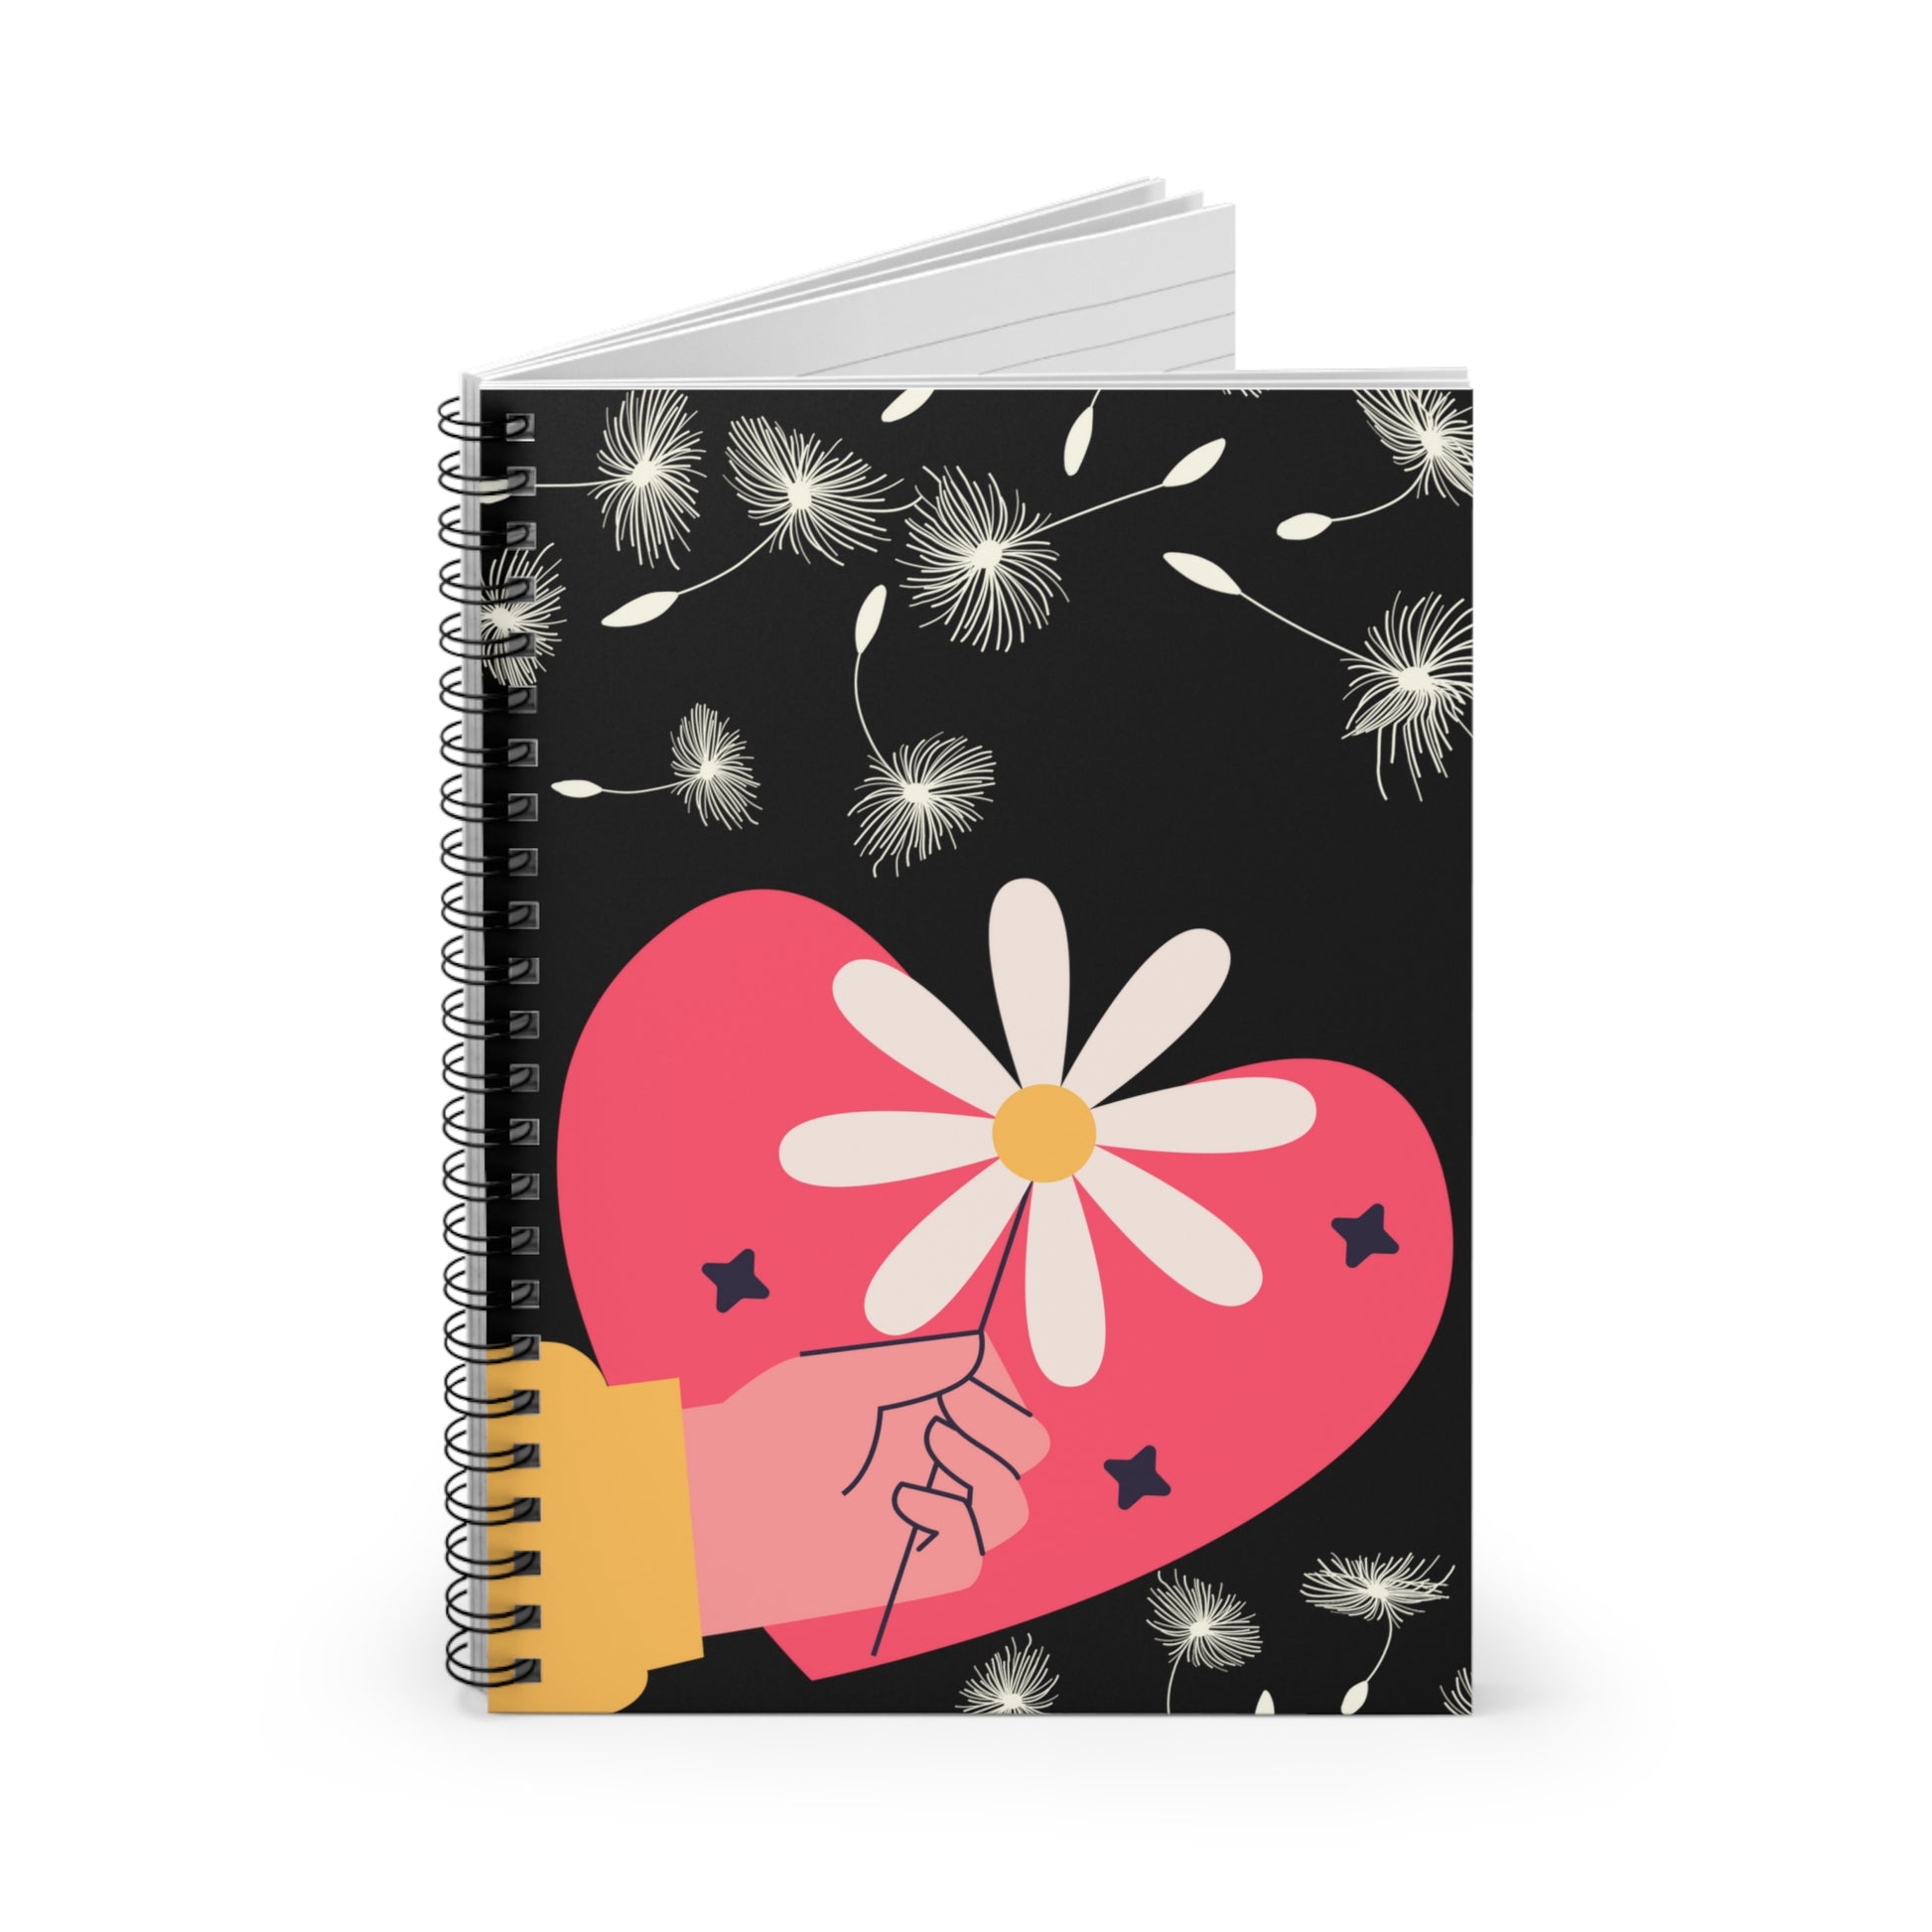 Daisy Heart: Spiral Notebook - Log Books - Journals - Diaries - and More Custom Printed by TheGlassyLass.com